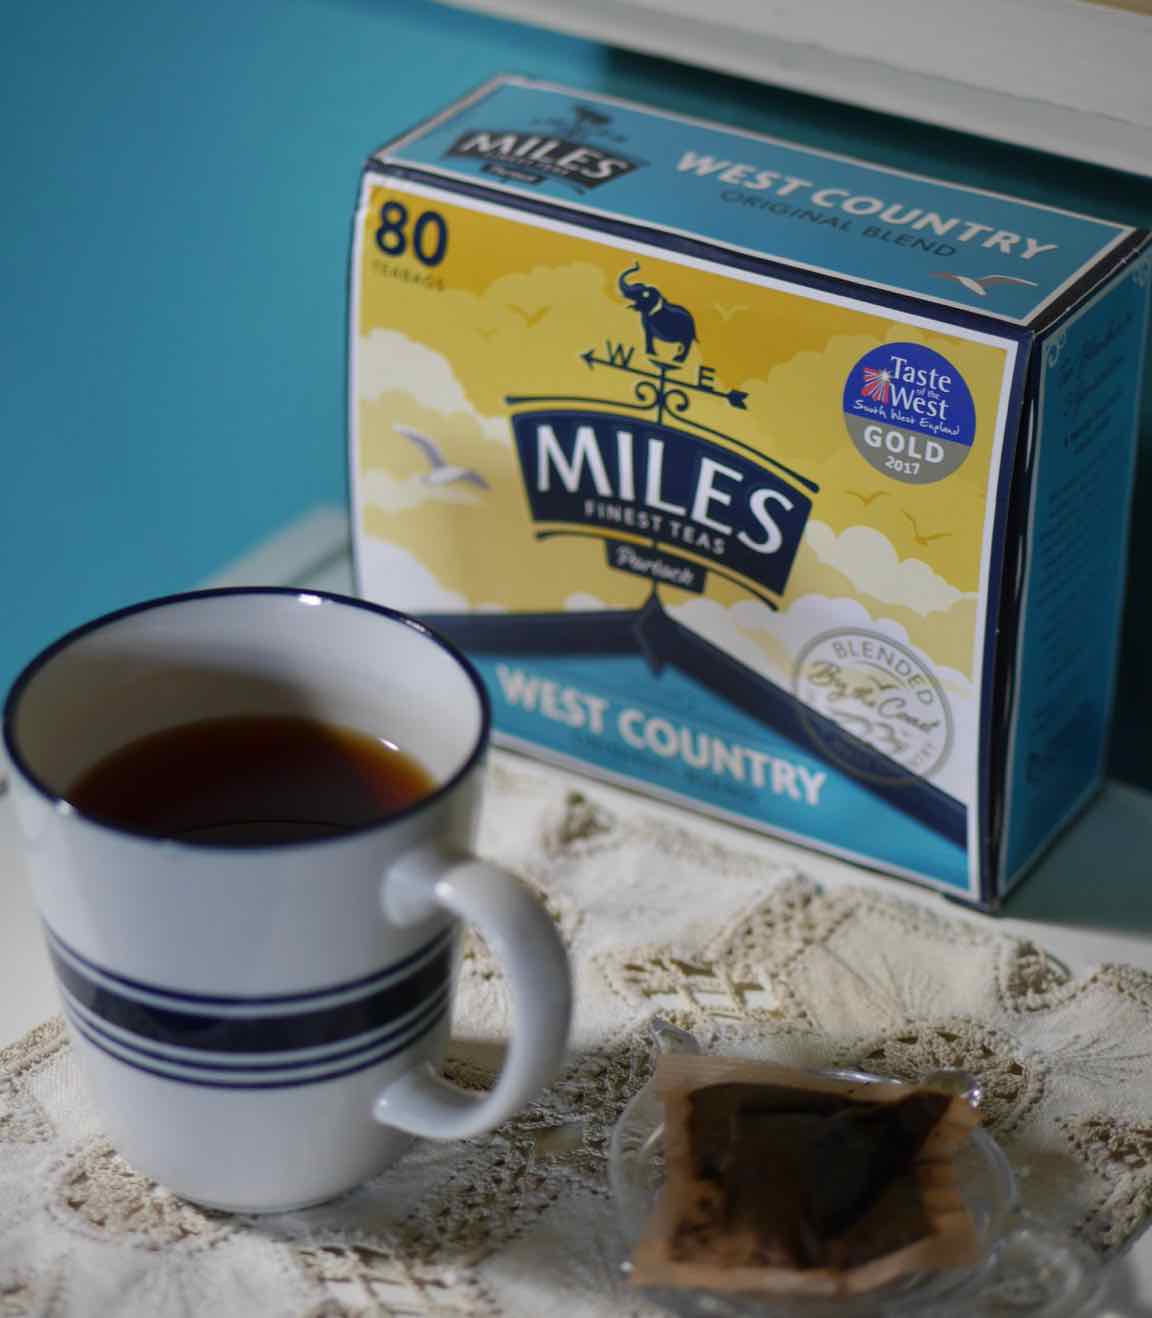 Miles West Country Tea package and cup of brewed tea